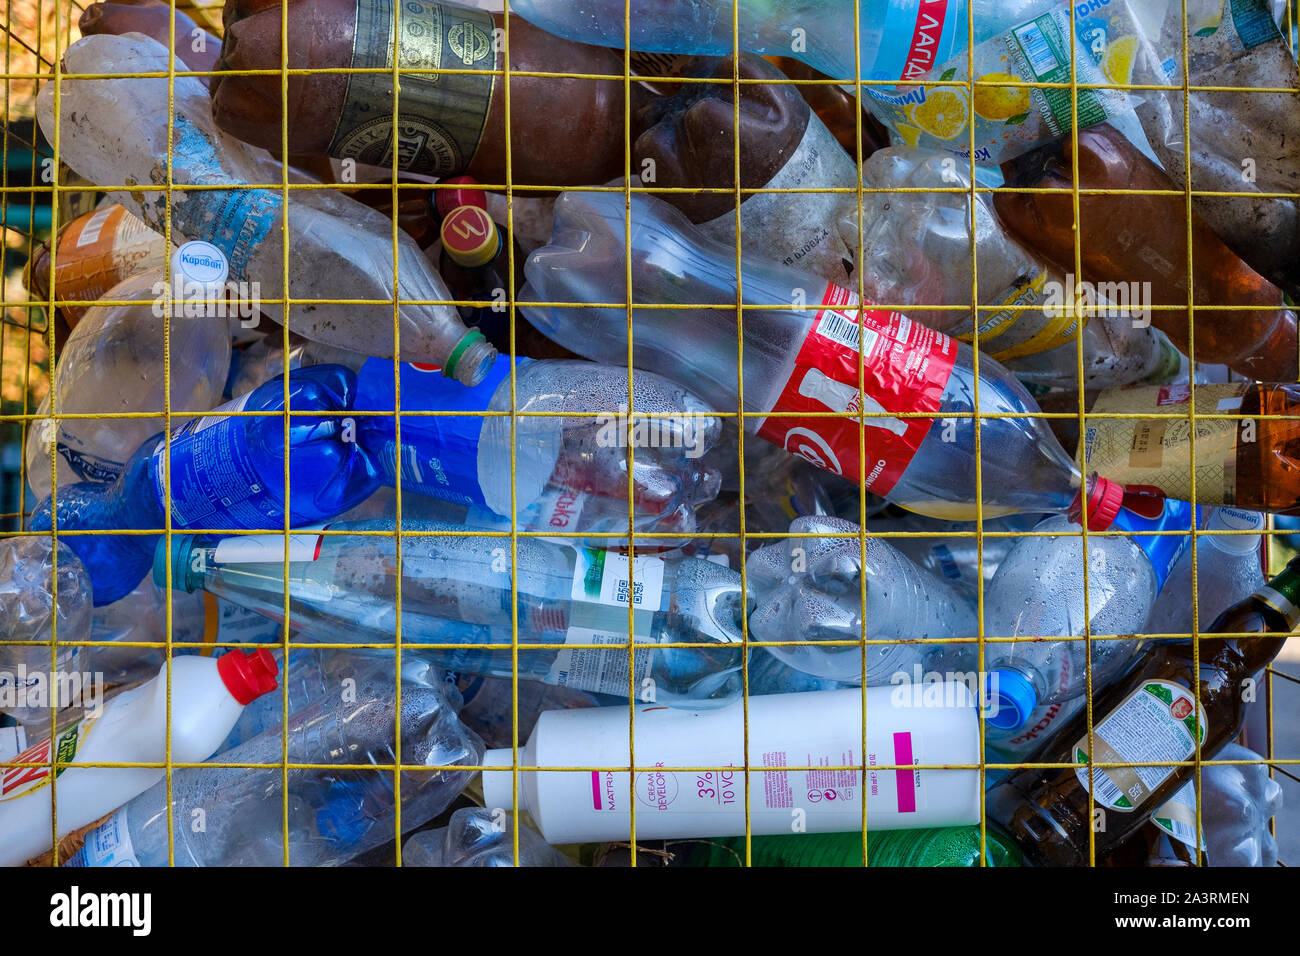 Used and disposed plastic bottles collected in a box with yellow grid. Waste sorting and recycling concept. Close-up view in full frame Stock Photo